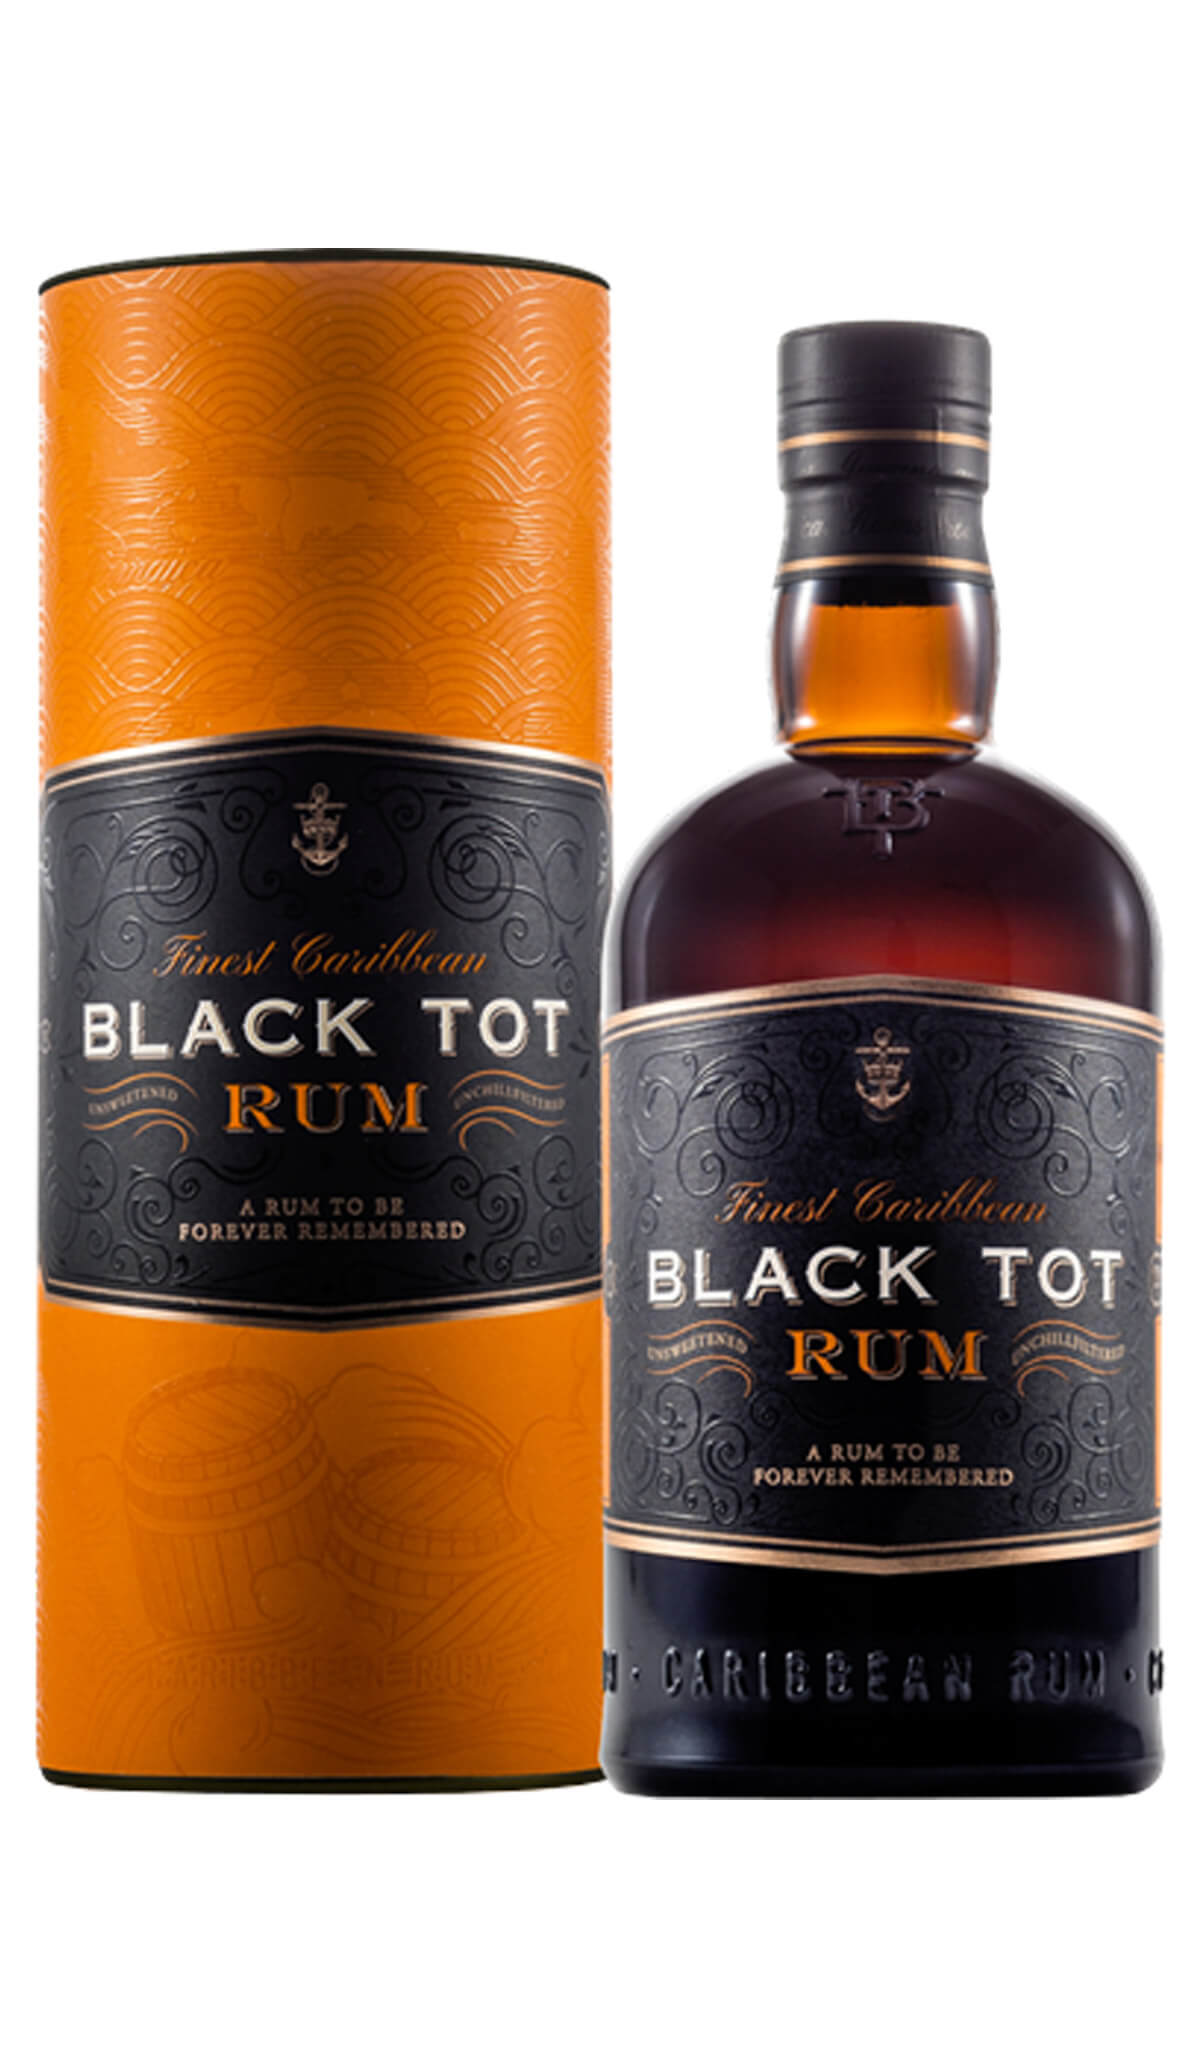 Find out more, explore the range and purchase Black Tot Finest Caribbean Rum 700ml available online at Wine Sellers Direct - Australia's independent liquor specialists.